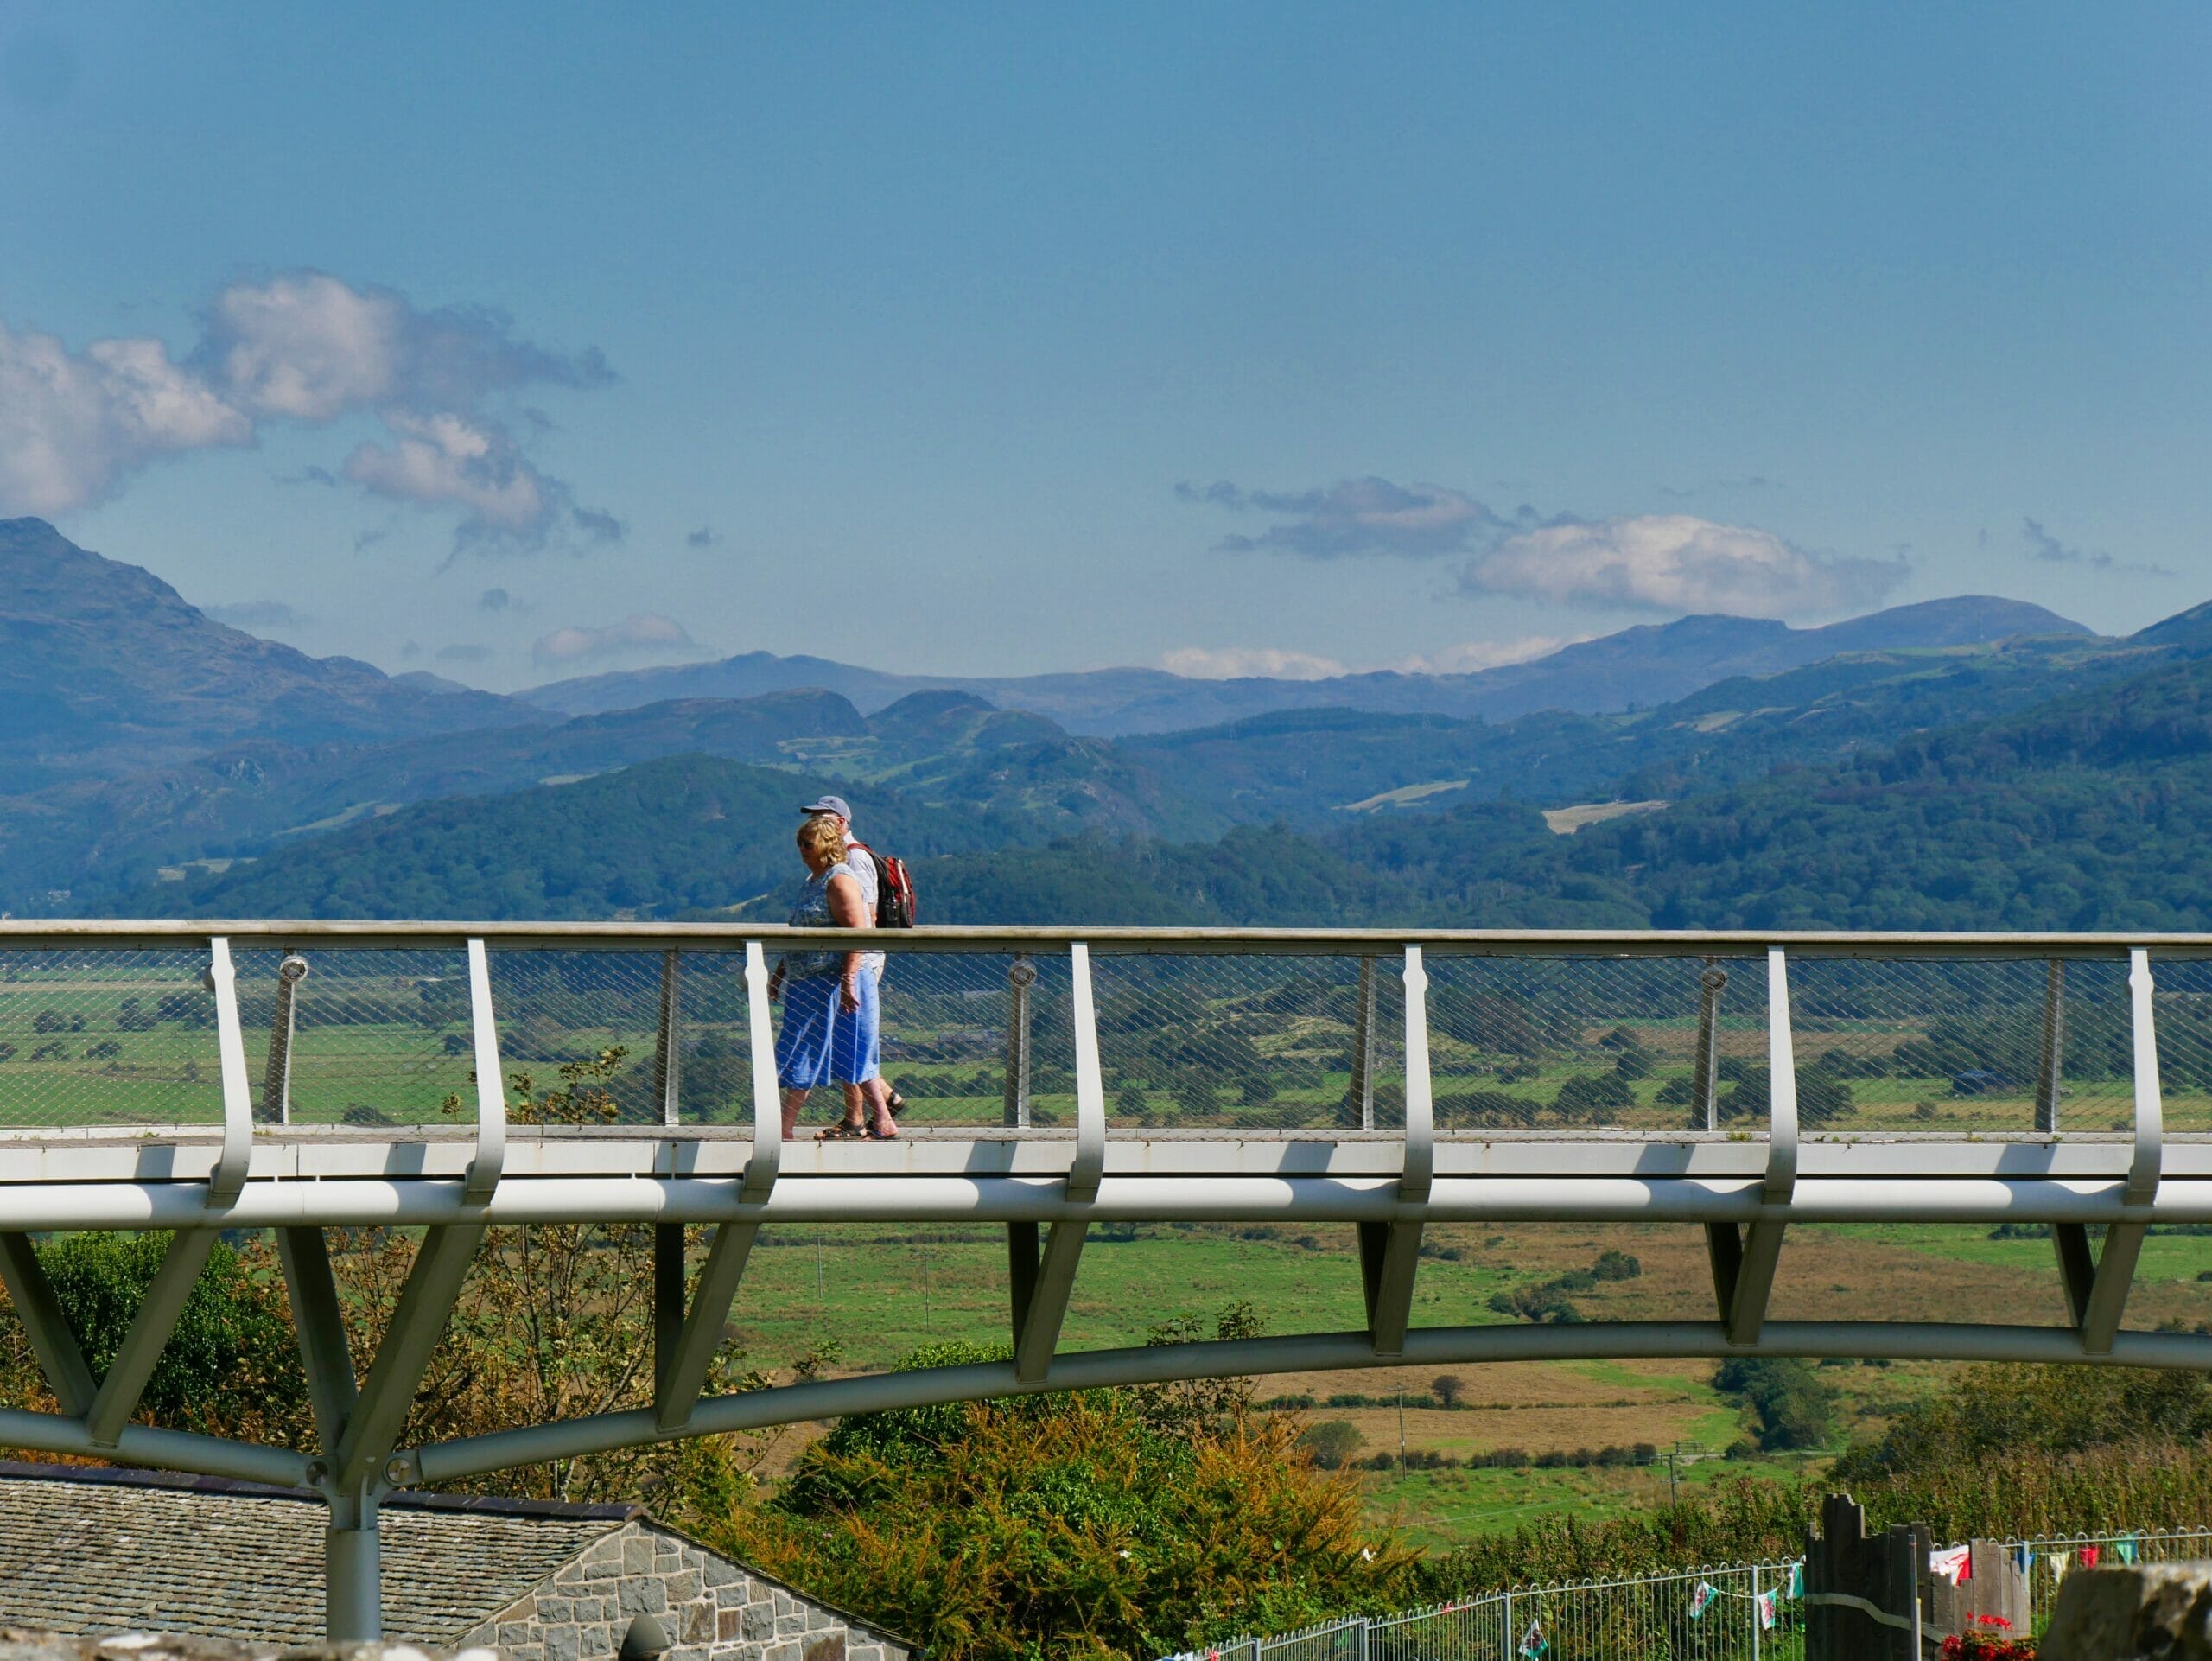 The bridge that crosses over to Harlech Castle with two people walking on it and the Snowdonia mountains in the distance